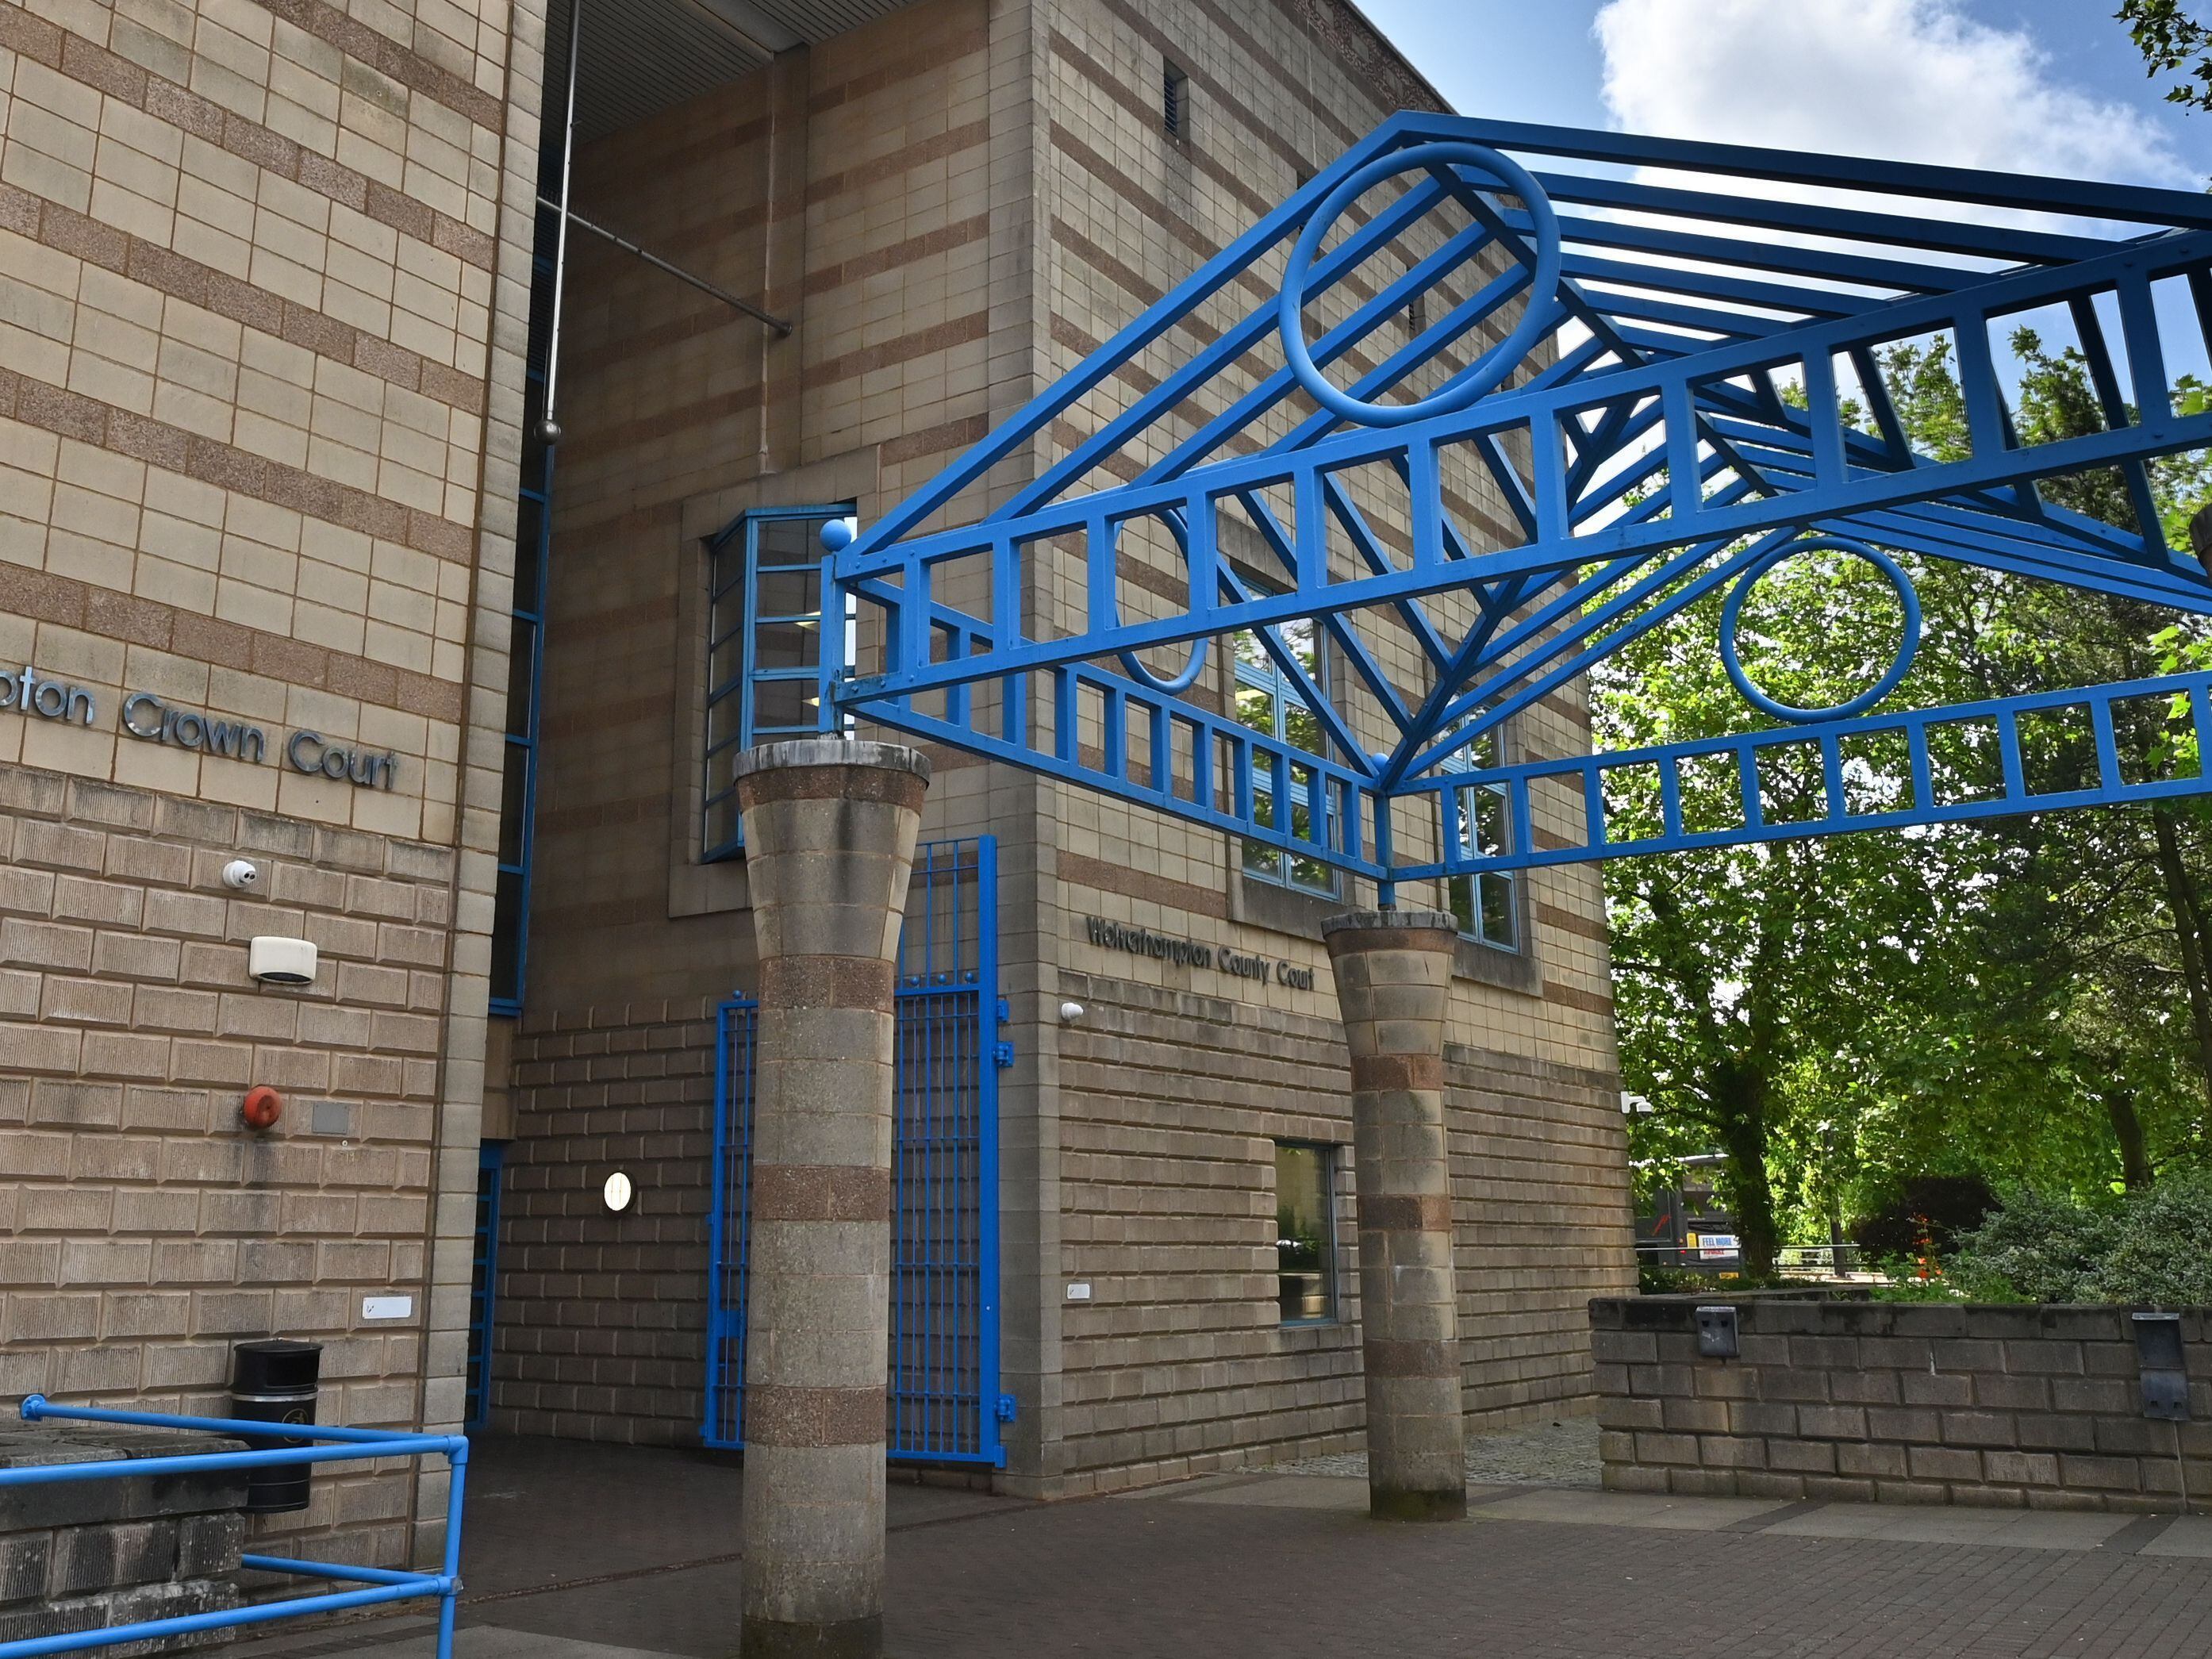 Drug dealer caught red-handed in West Bromwich avoids jail